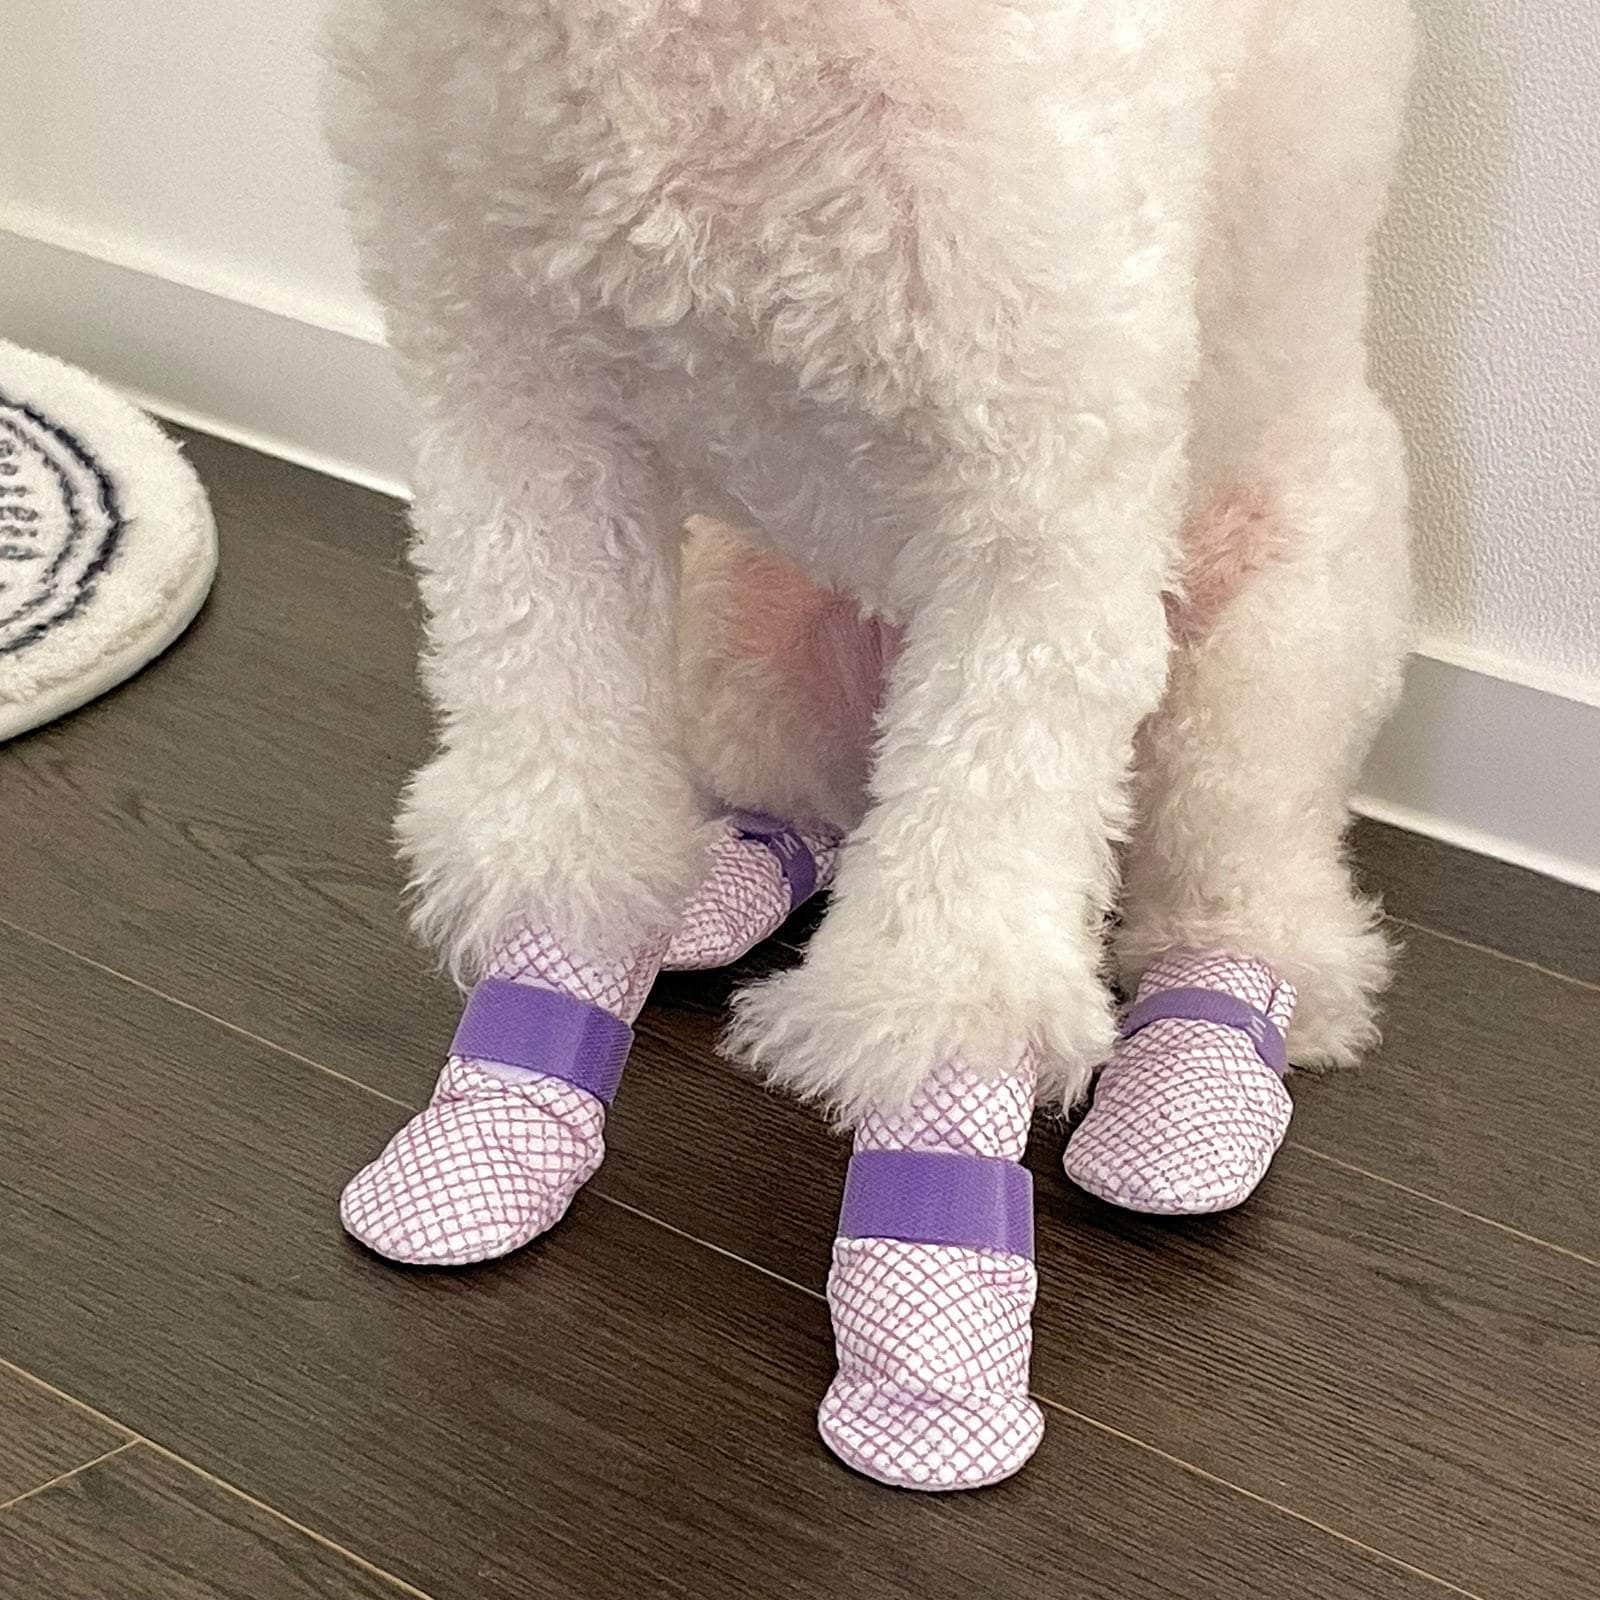 28pc S Violet Dog Shoes Waterproof Disposable Boots Anti-Slip Socks